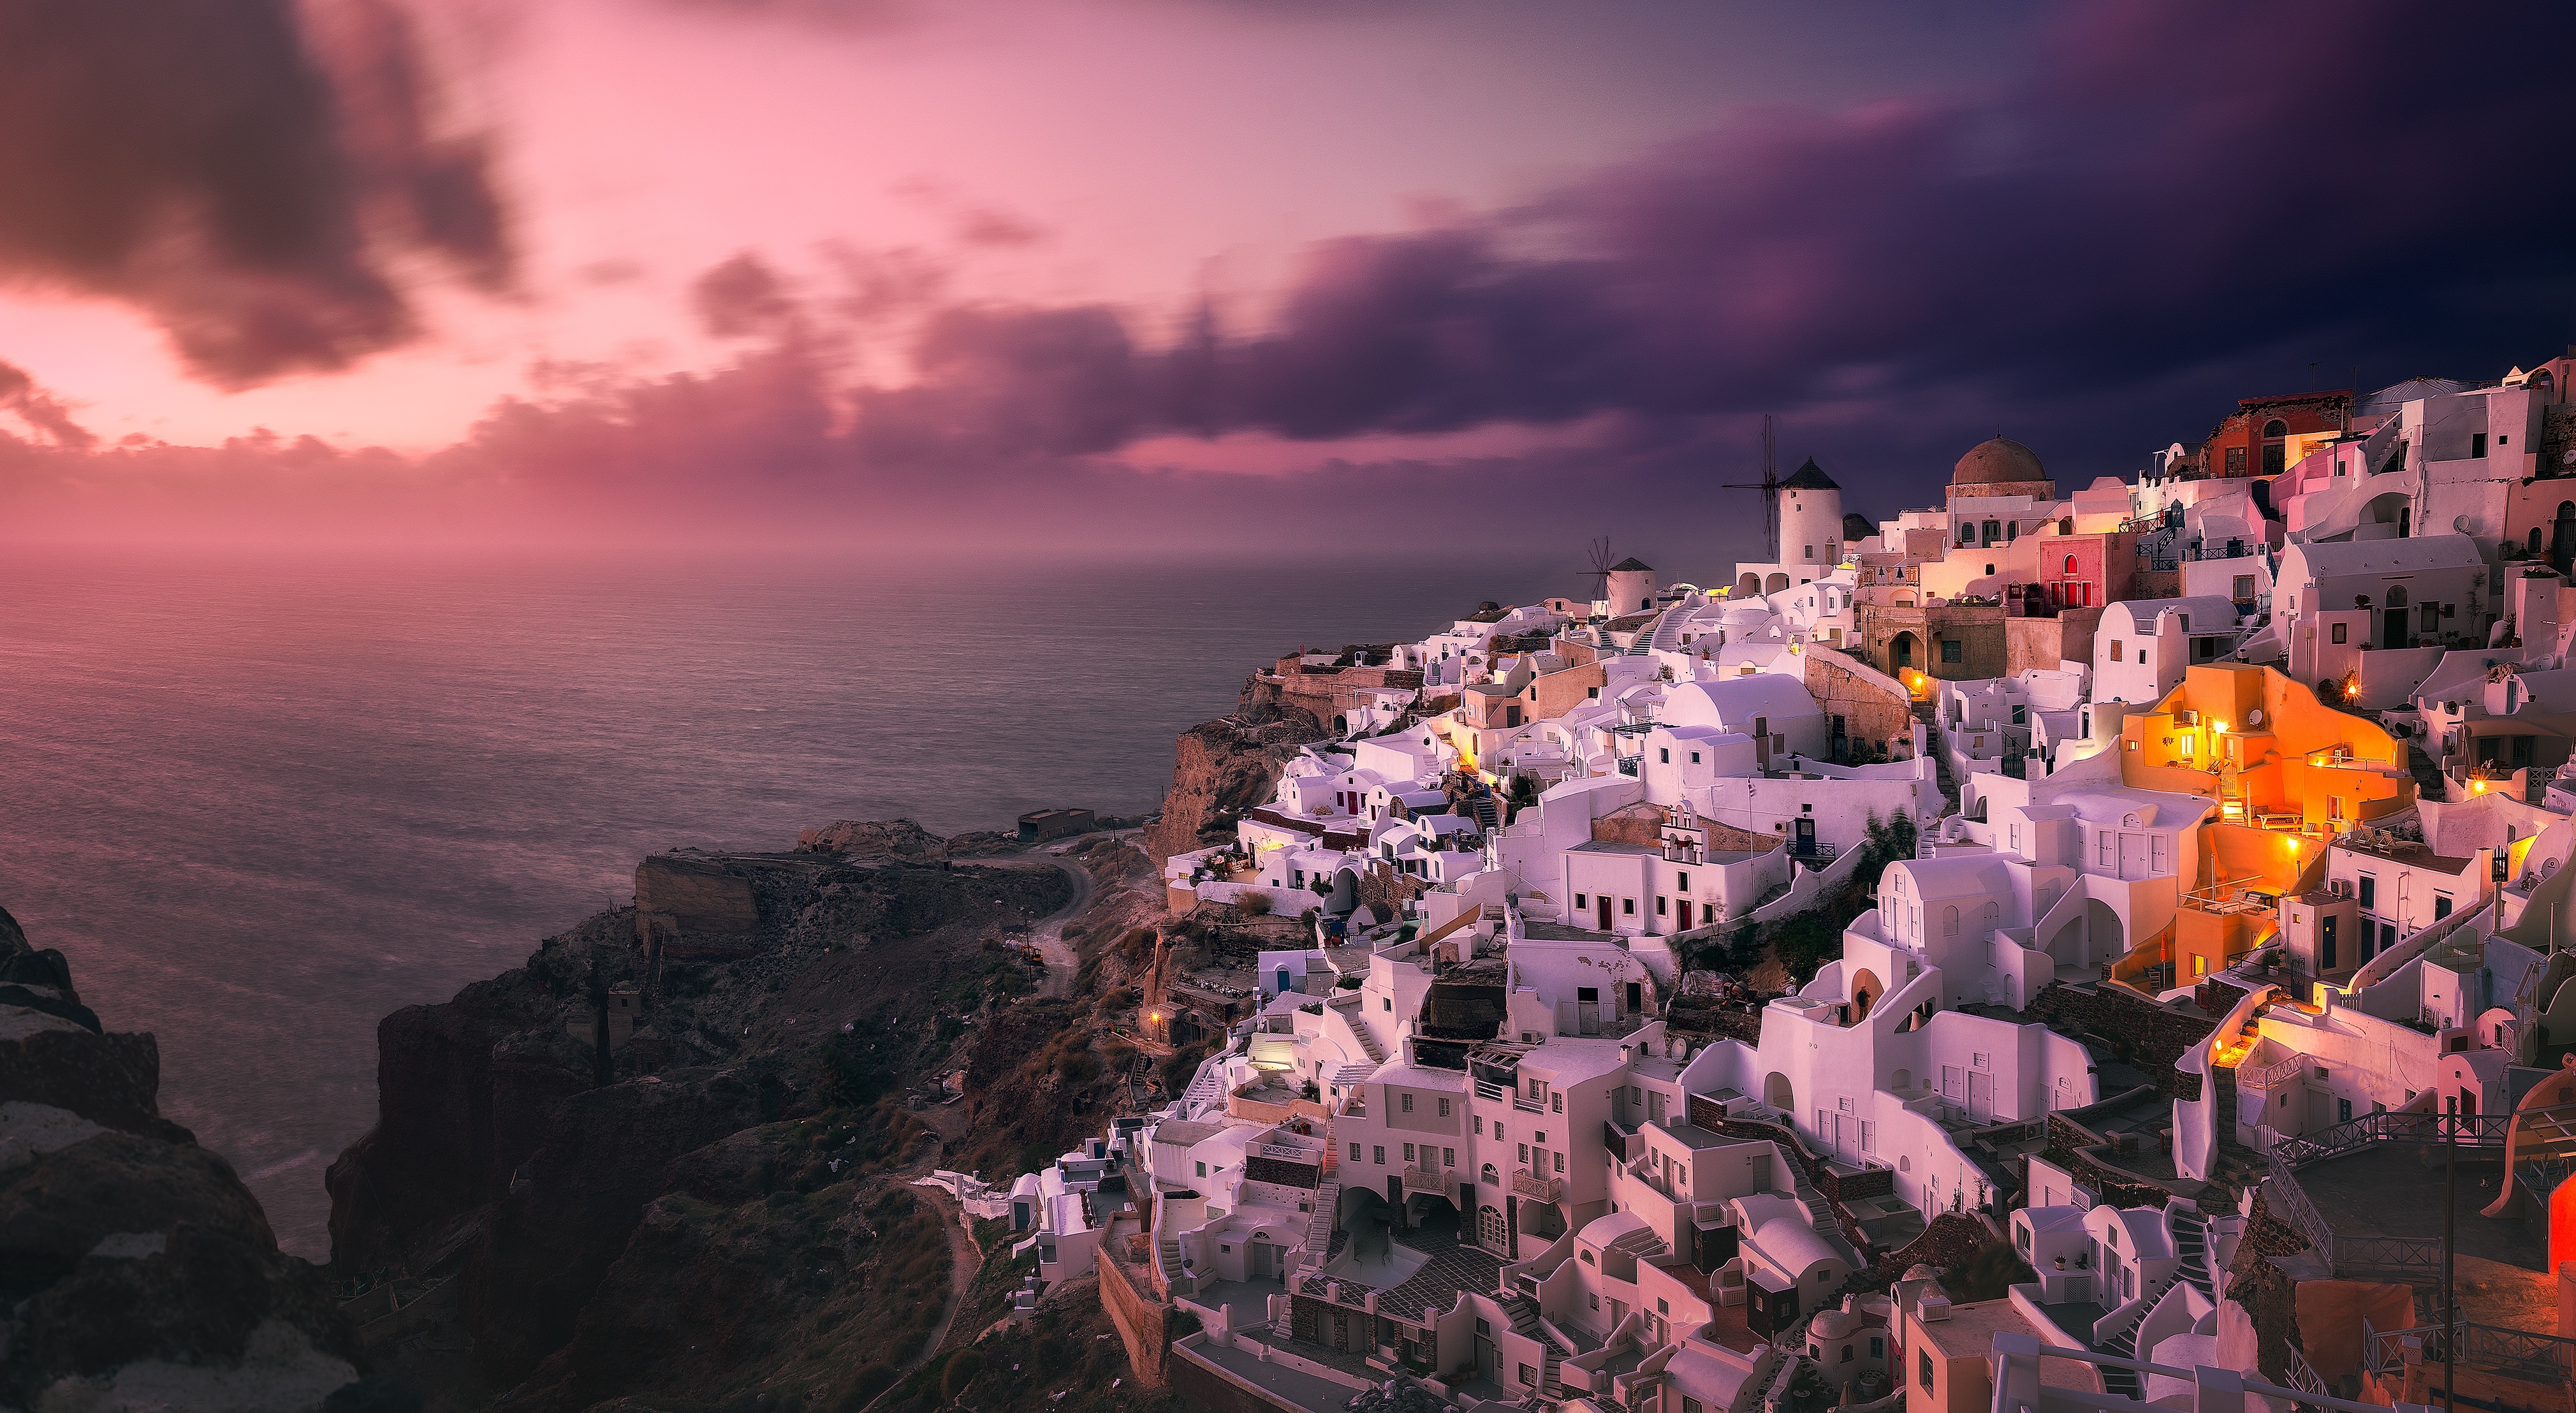 Santorini Island Greece Wallpaper Hd City 4k Wallpapers Images Photos And Background Wallpapers Den